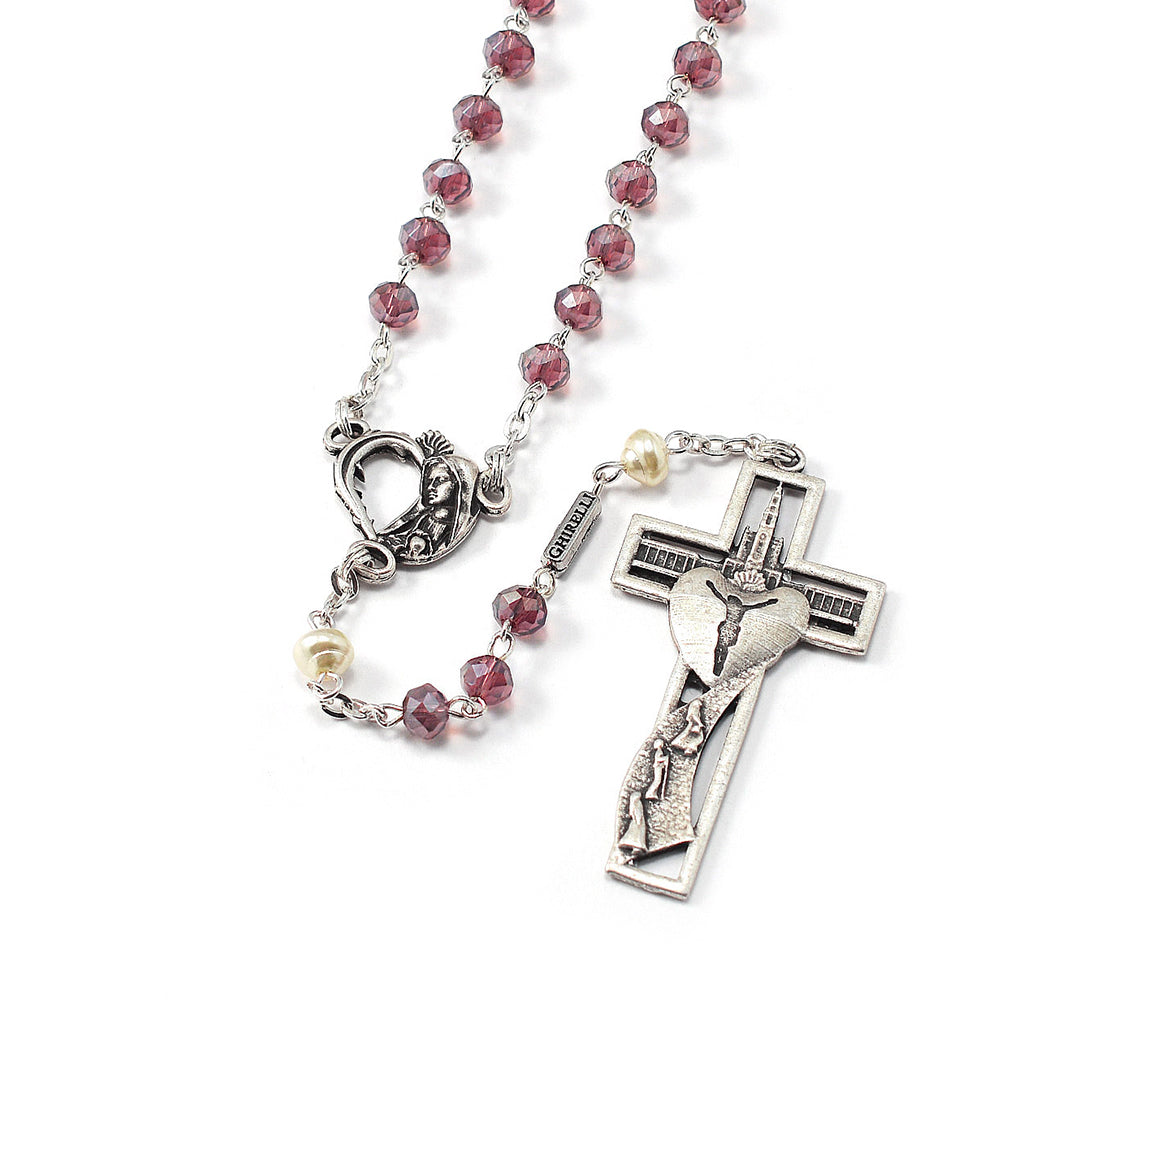 Buy Custom Rosary-Crucifix & Centerpiece, Red Crystal Beads 6mm